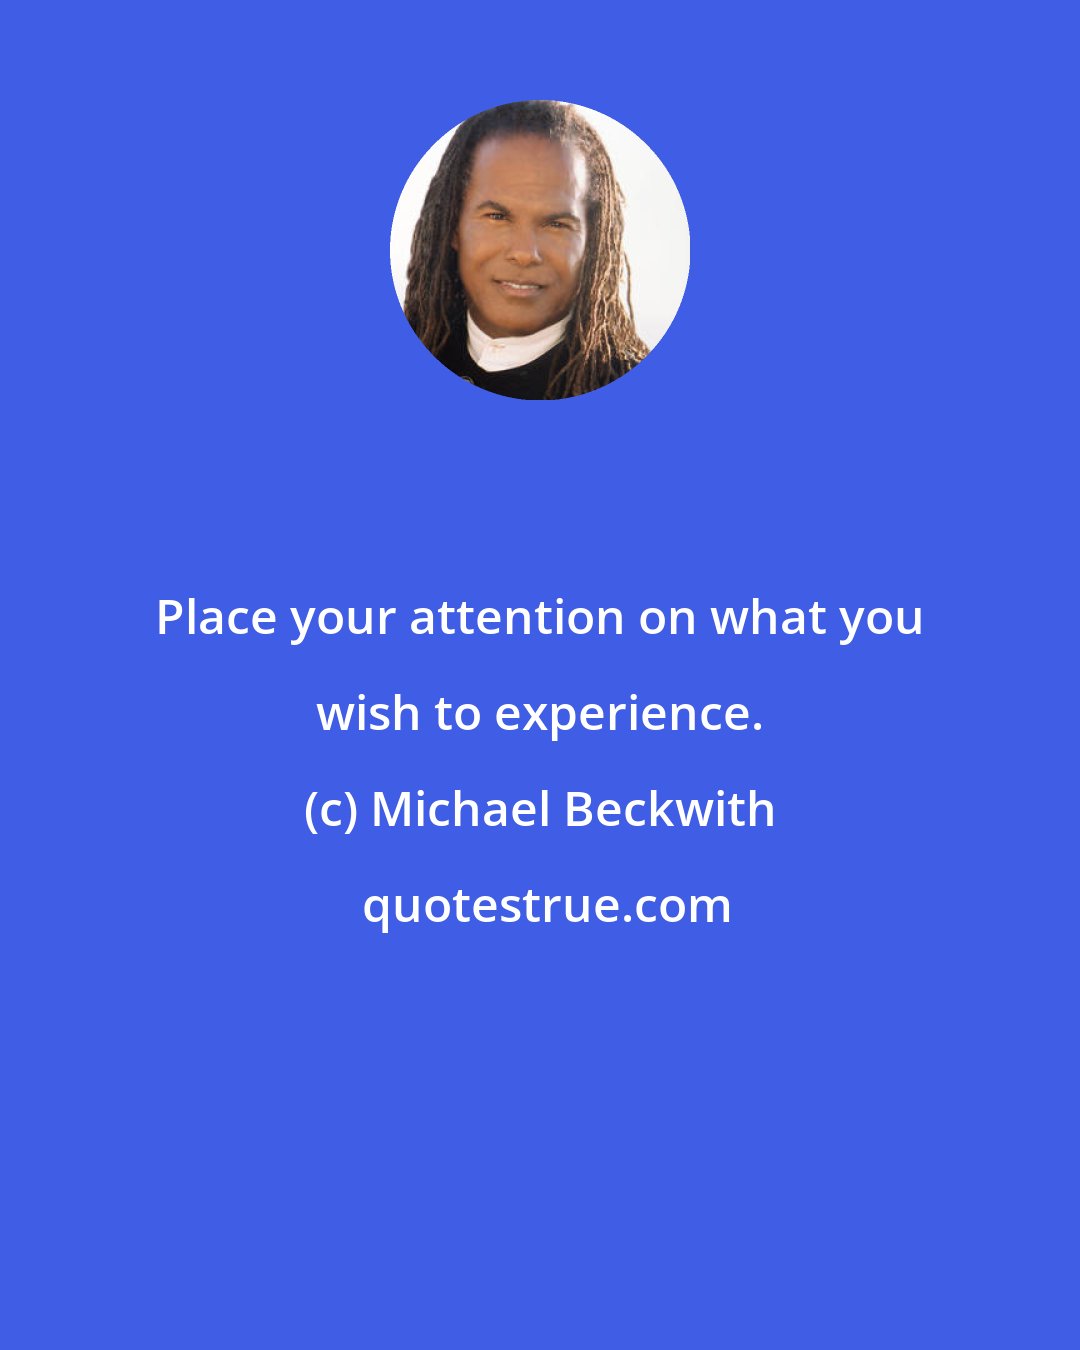 Michael Beckwith: Place your attention on what you wish to experience.